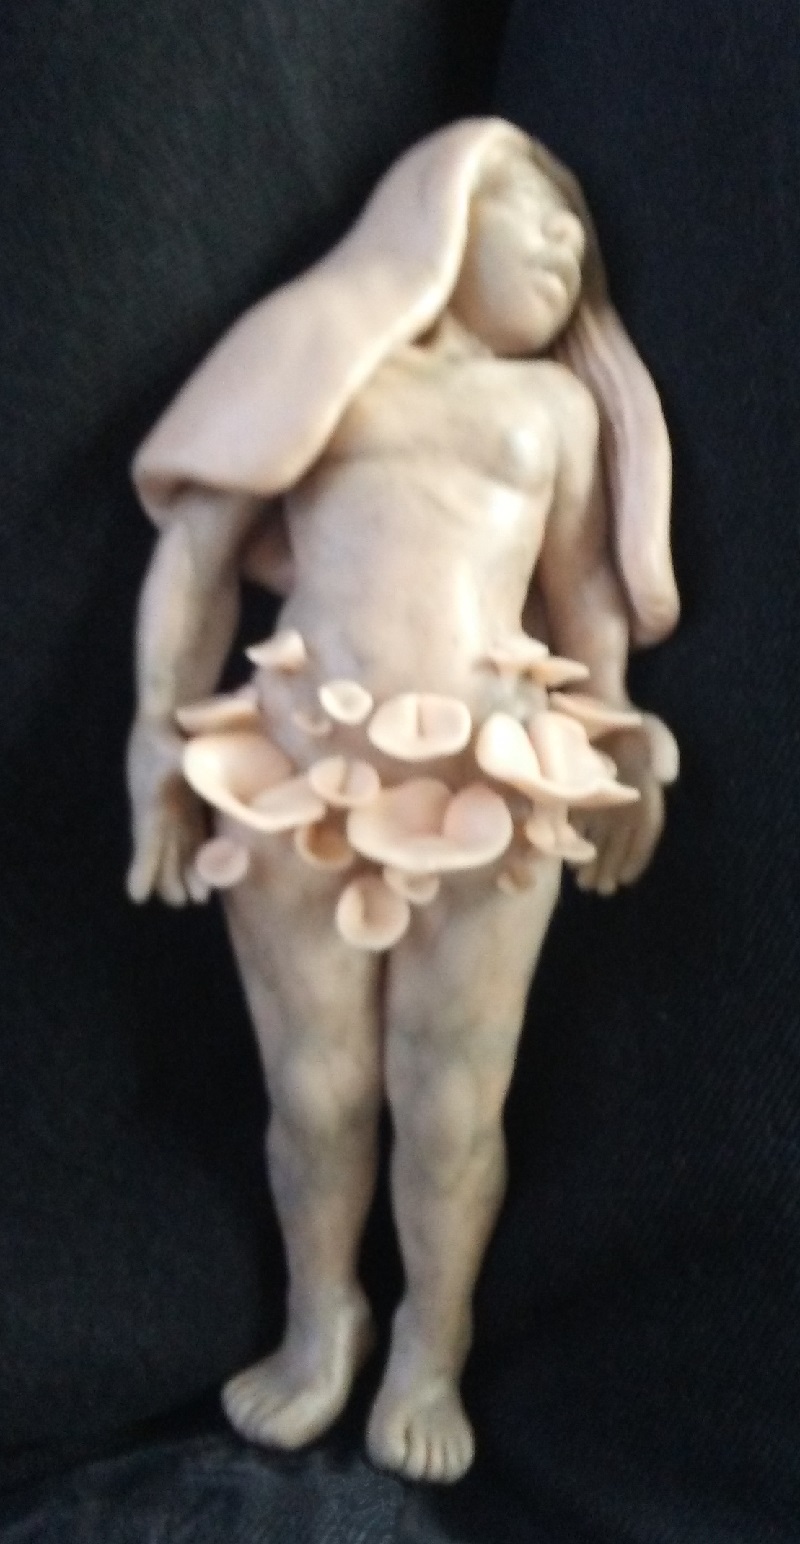 the previous sculpture without paint. it is pale peach colored